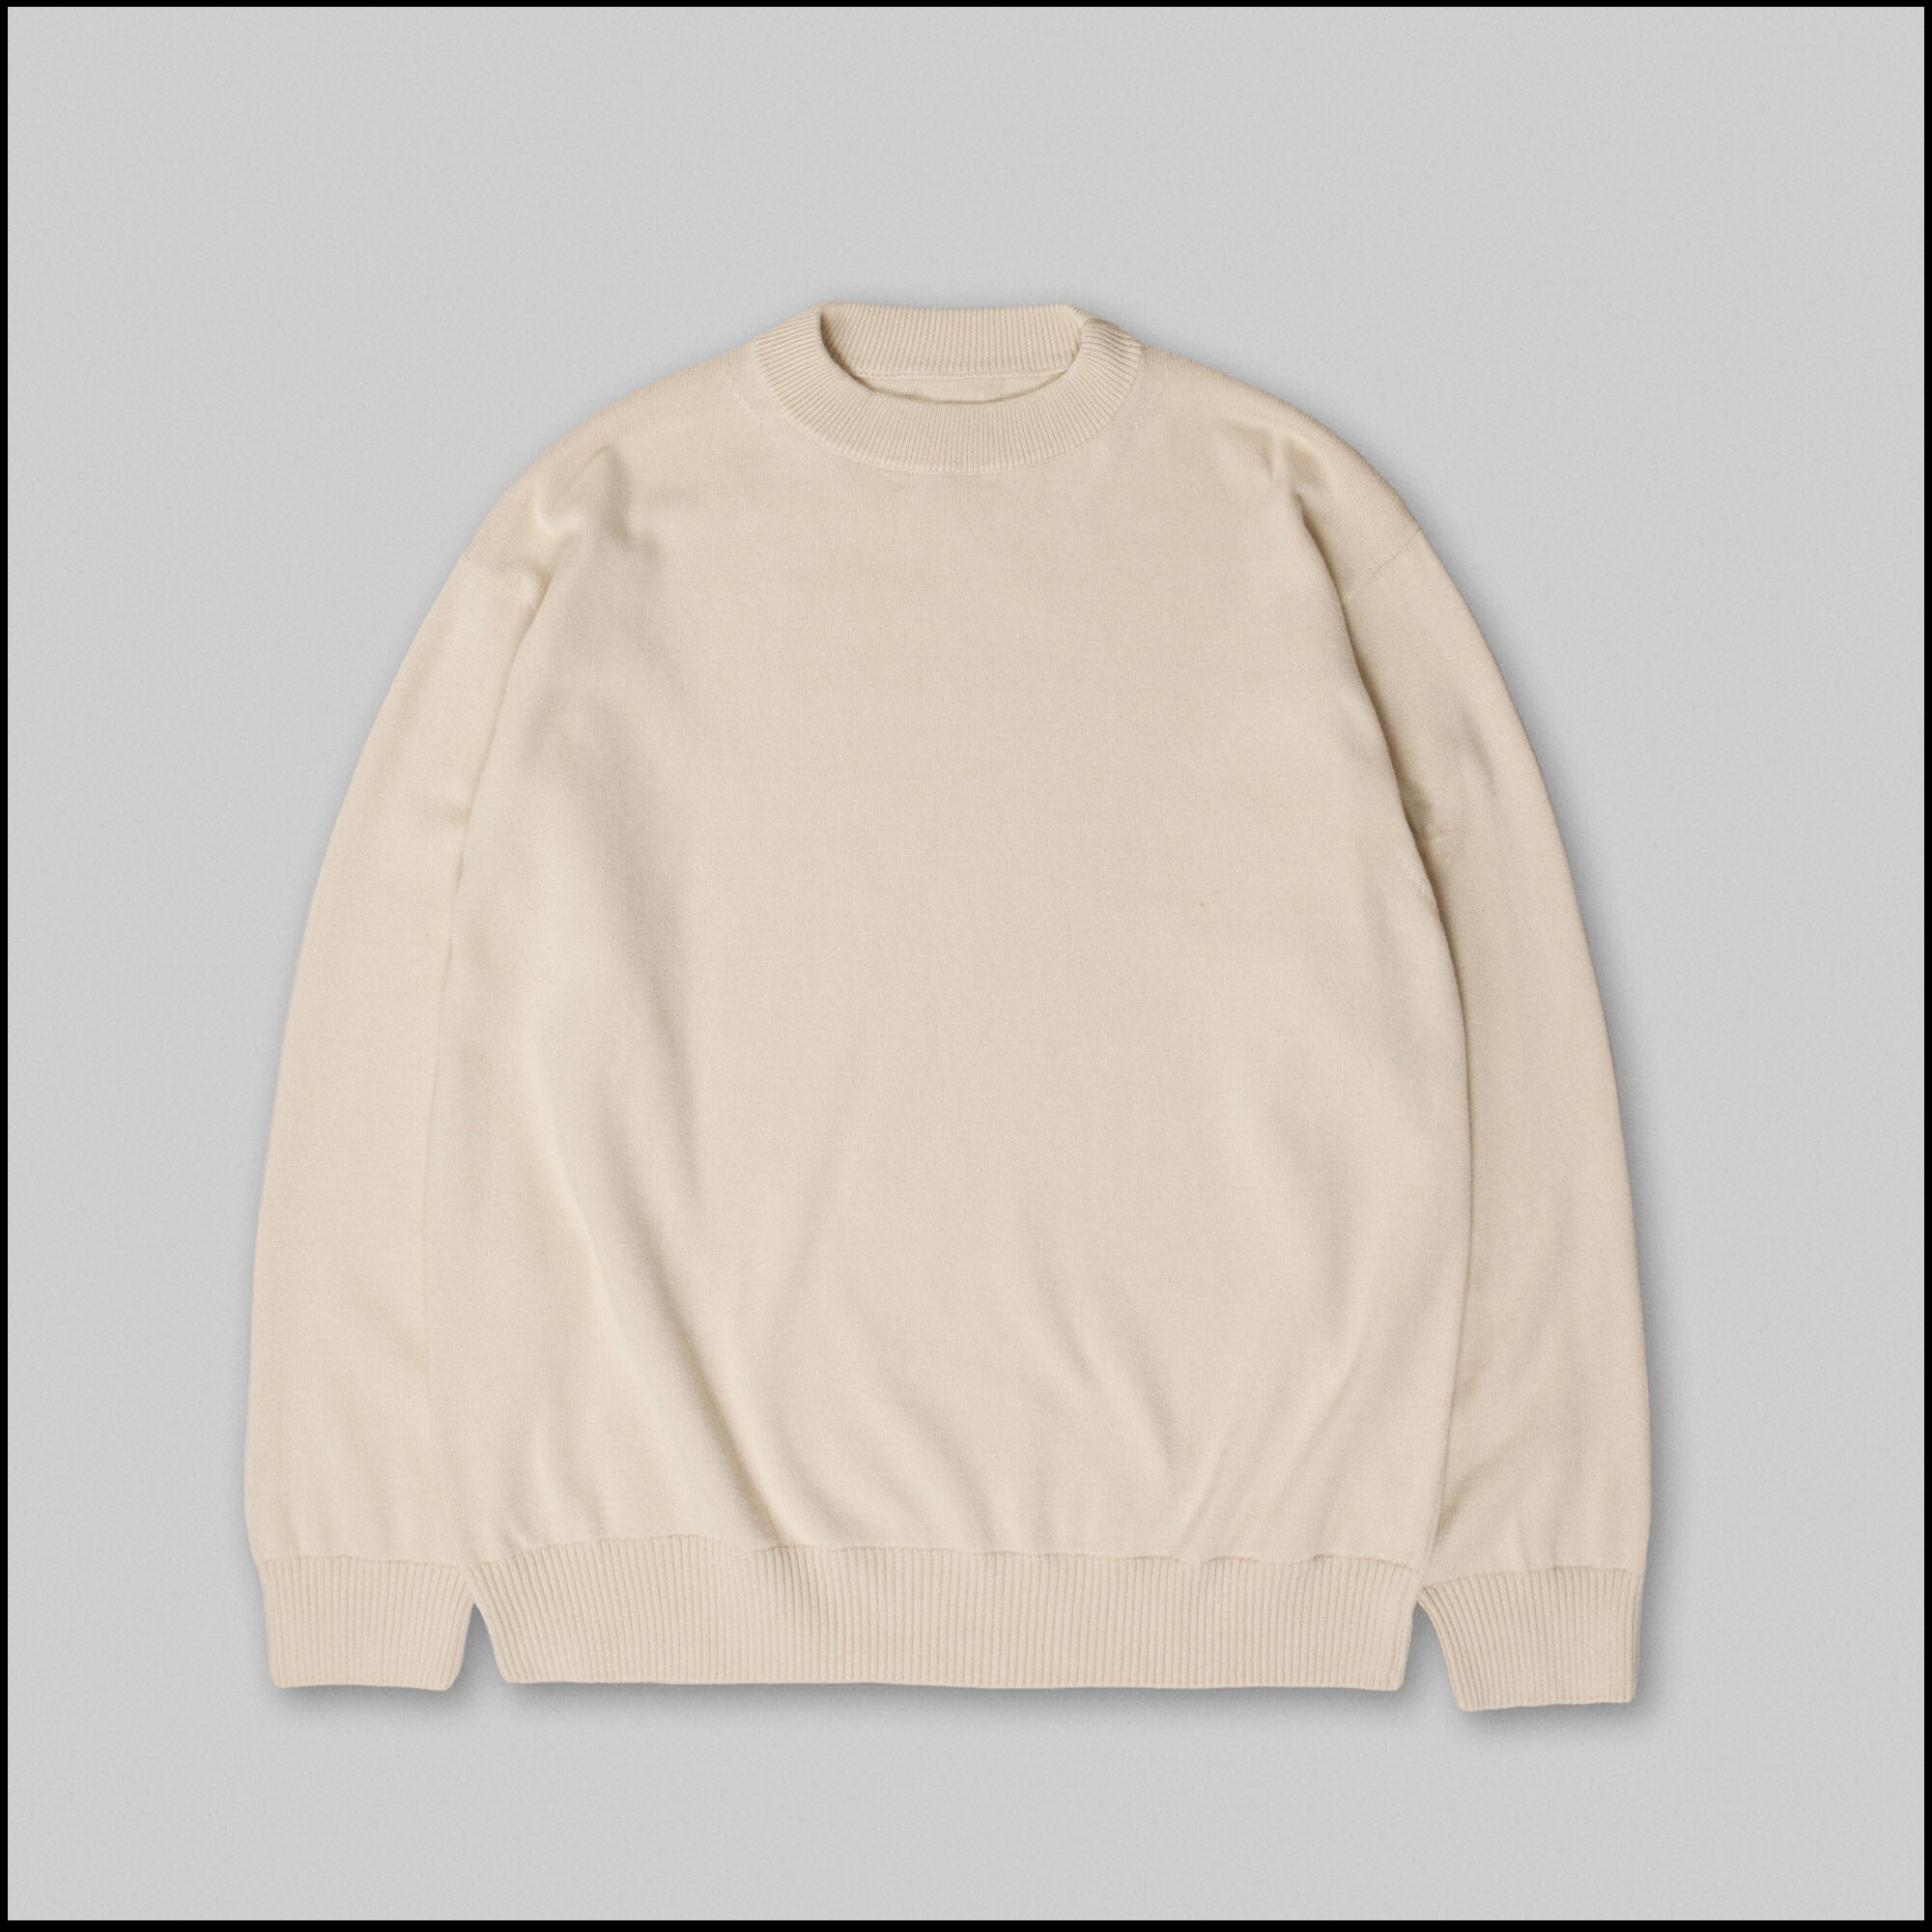 STANDARD sweater by Arpenteur in Natural color